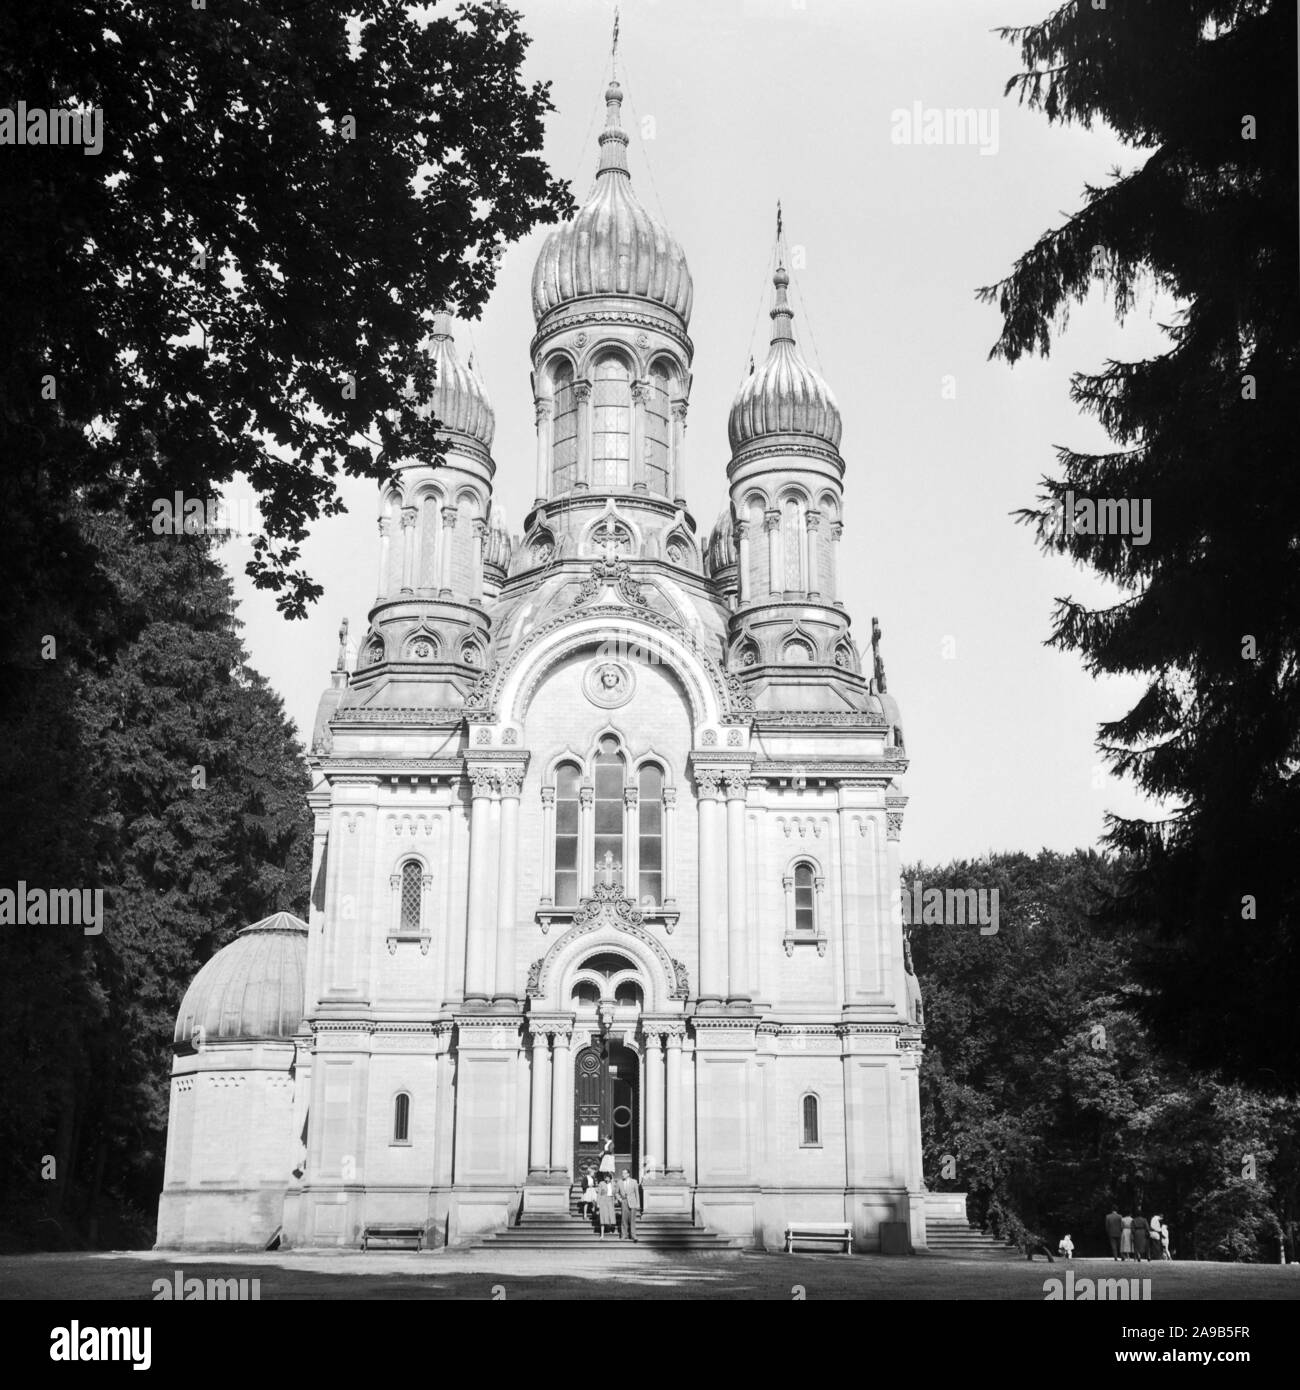 Russian orthodox church at the Neroberg hill in the North of Wiesbaden, Germany 1950s. Stock Photo